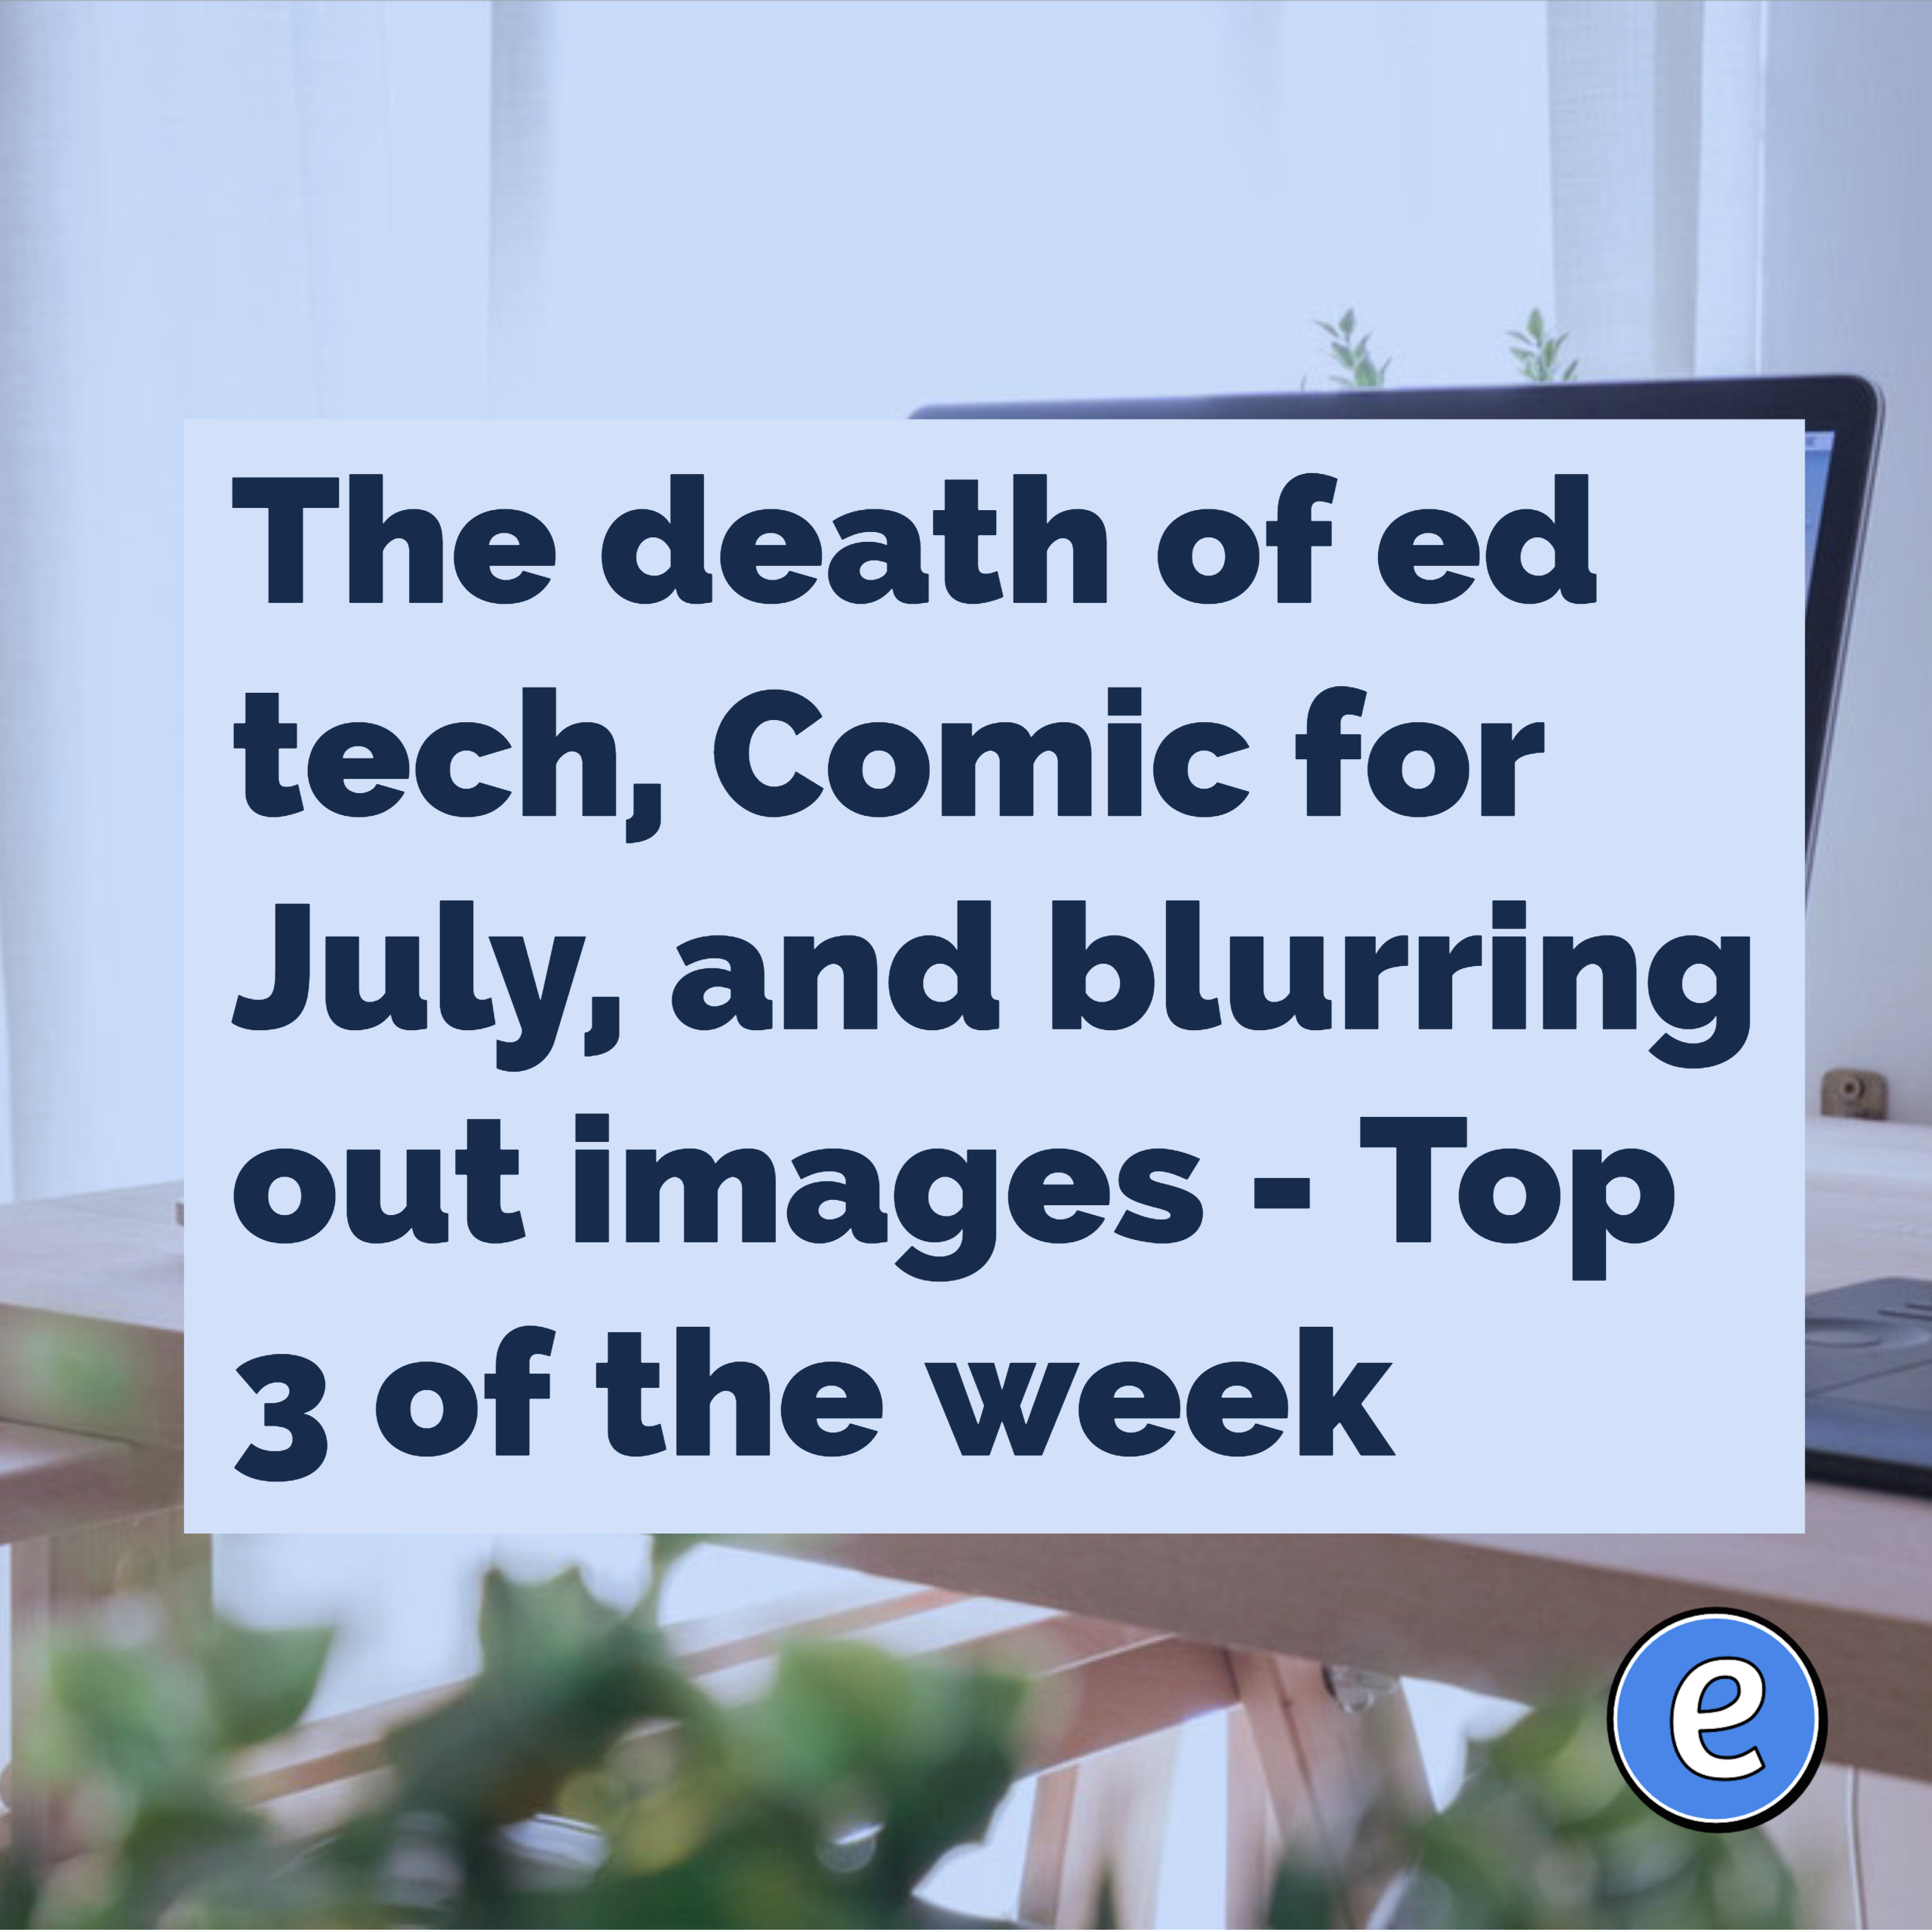 The death of ed tech, Comic for July, and blurring out images – Top 3 of the week